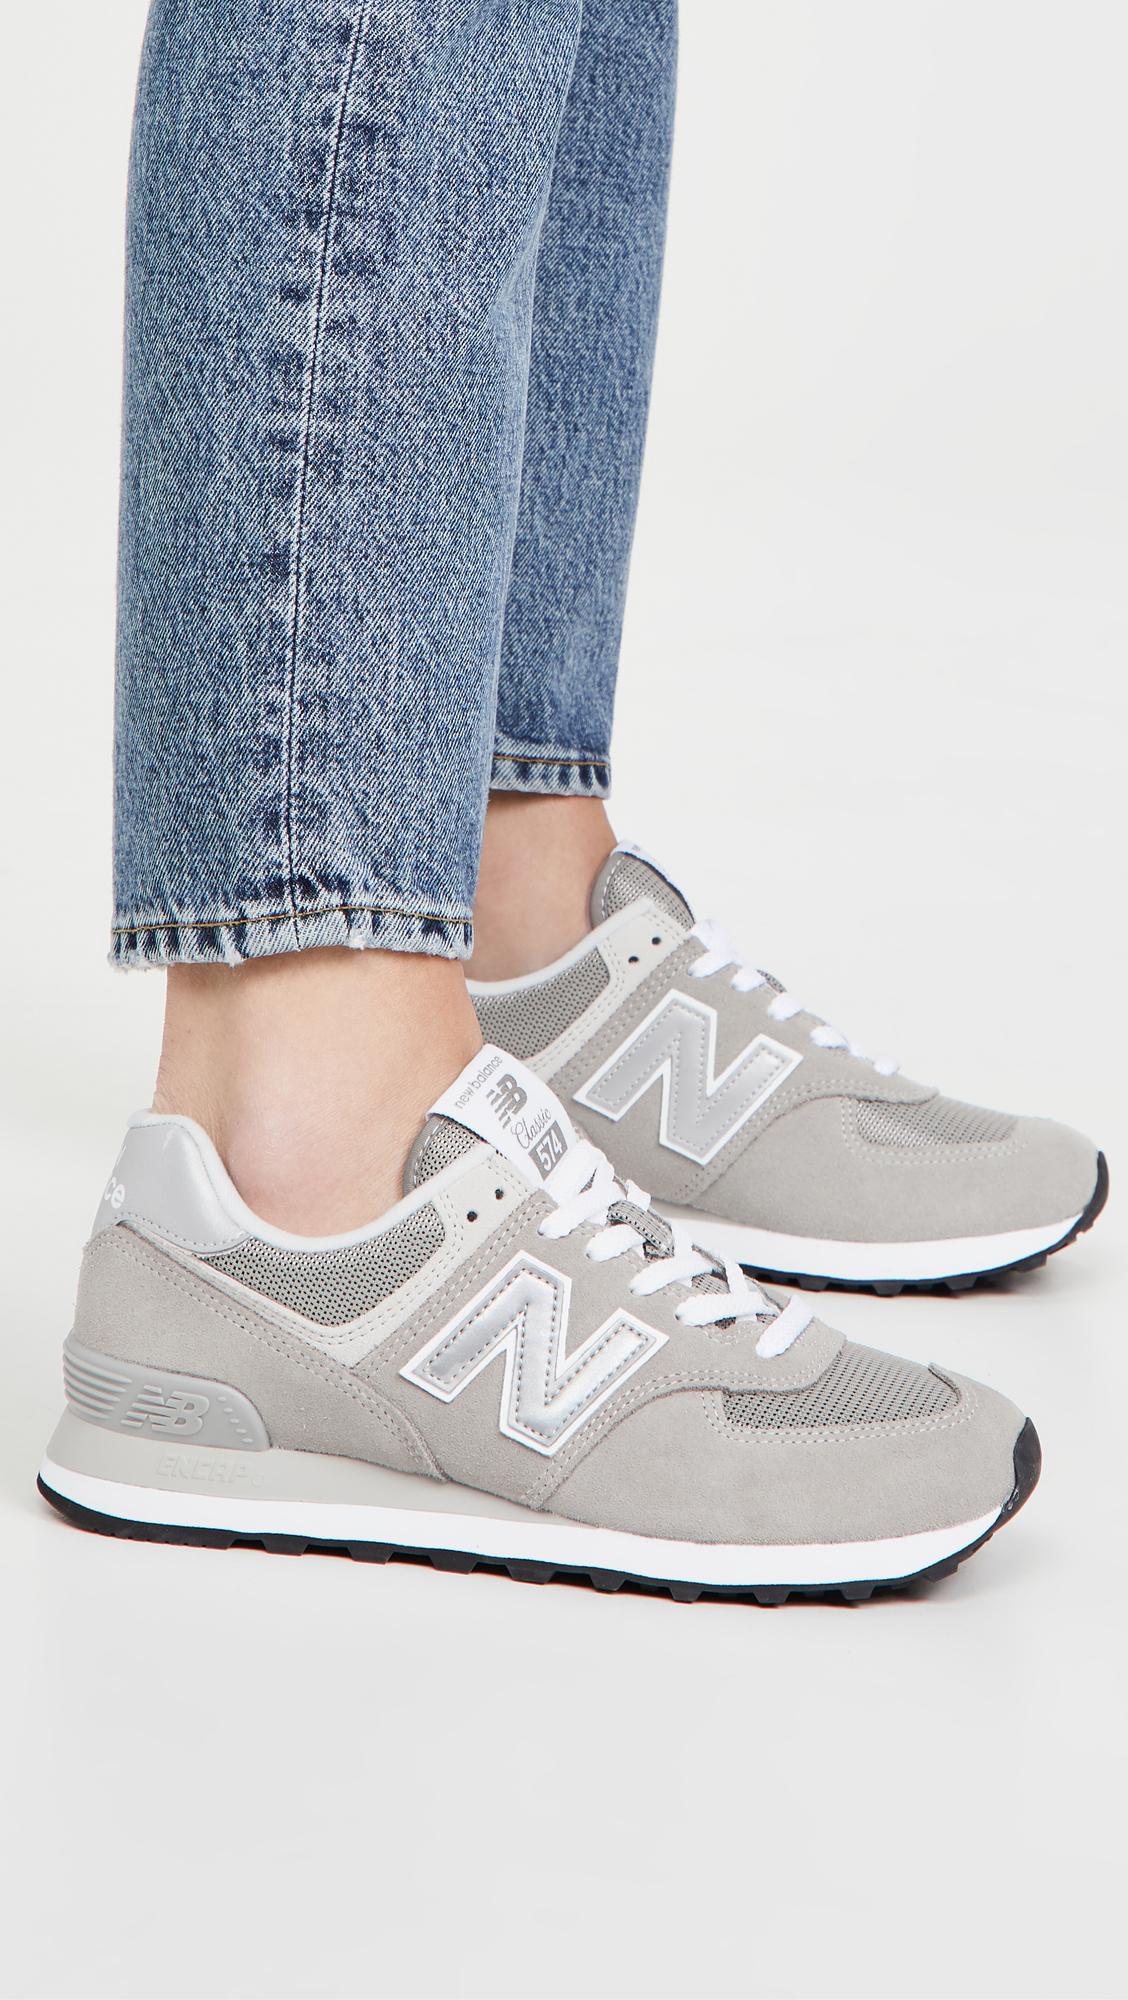 New Balance Leather 574 Iconic Classic Sneakers in Grey (Gray) | Lyst